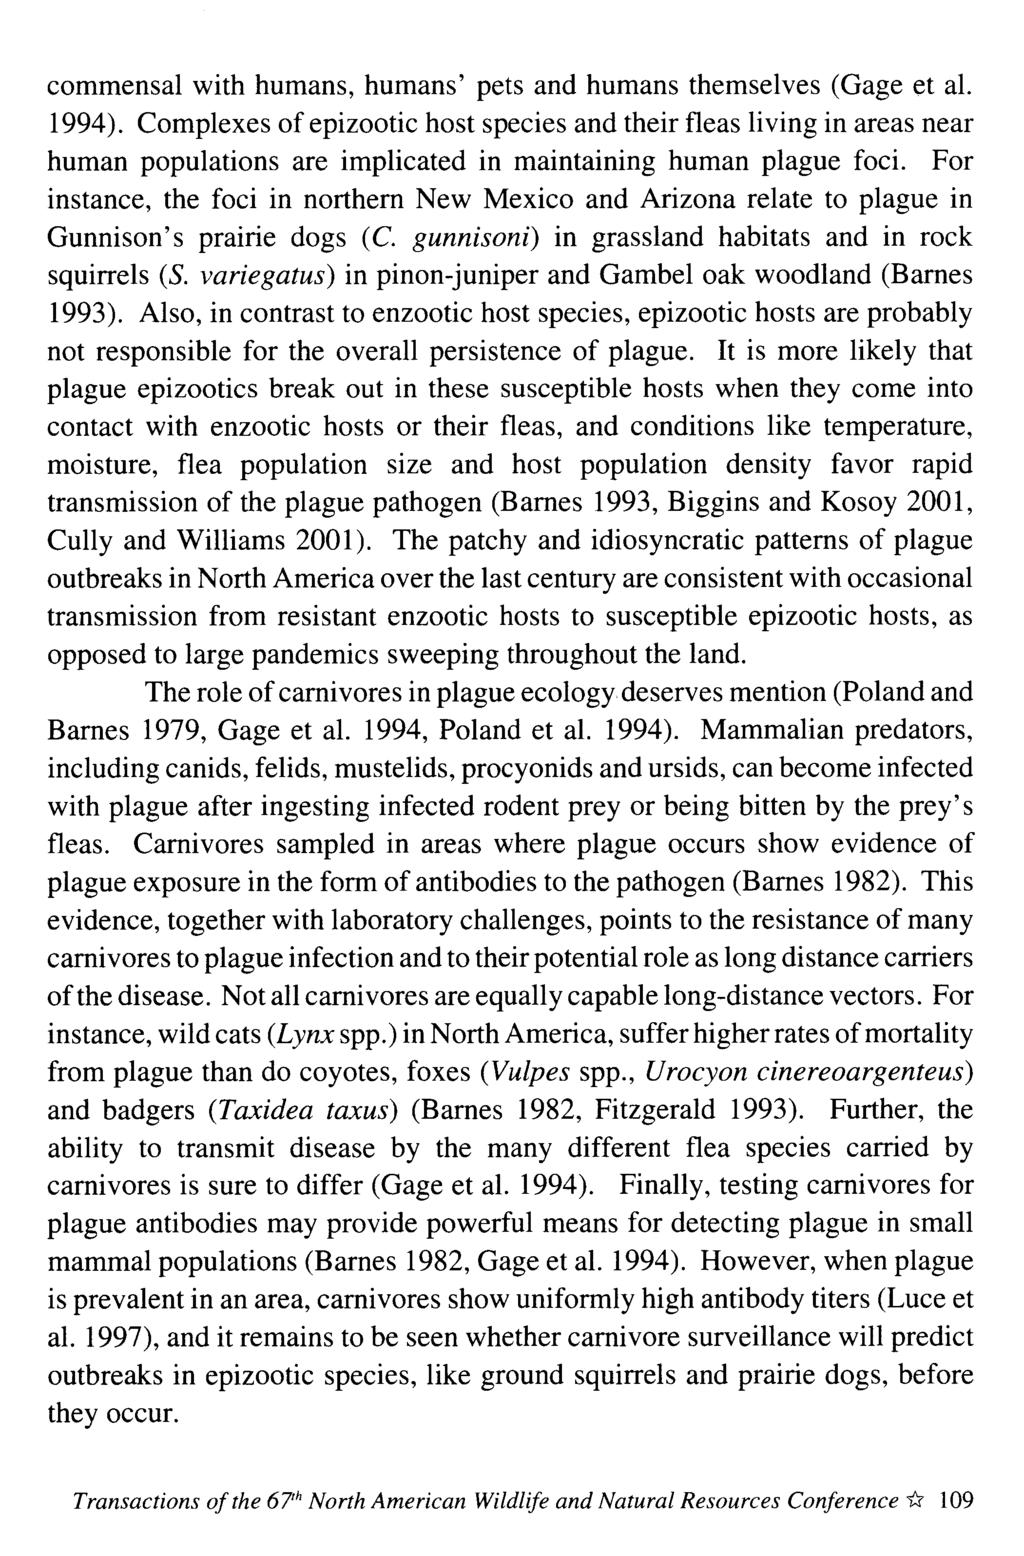 commensal with humans, humans' pets and humans themselves (Gage et al. 1994).